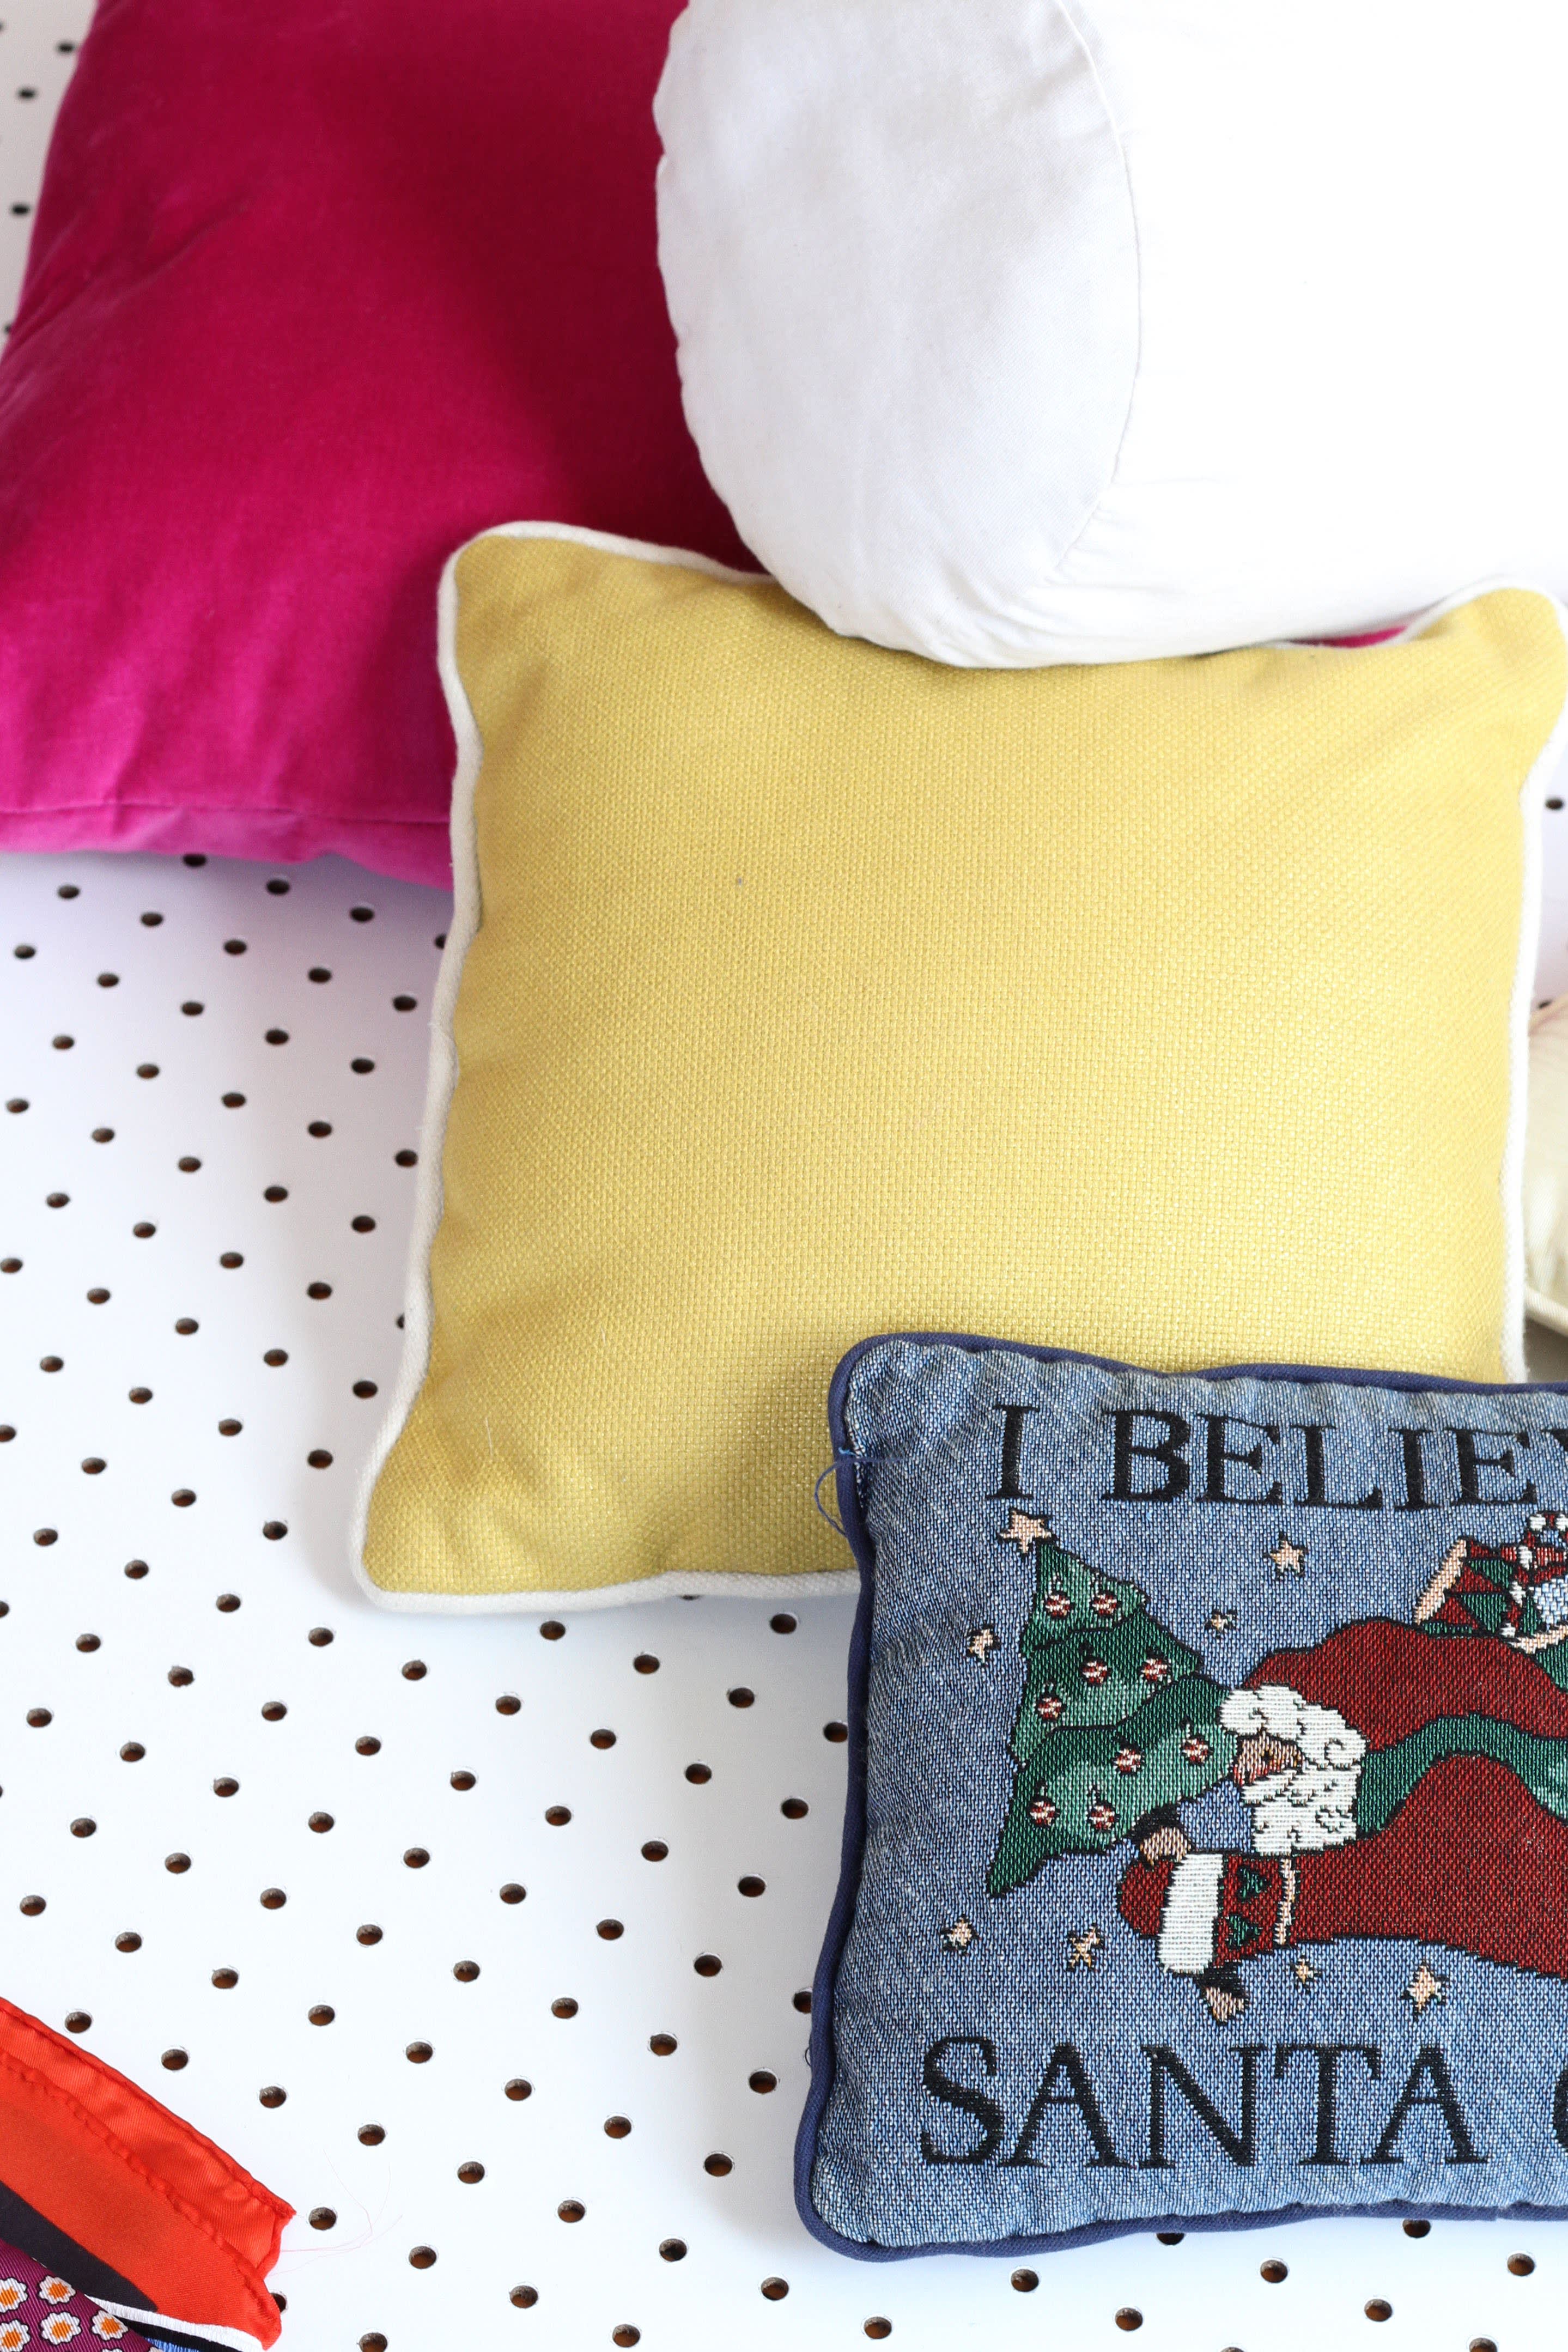 How To Make Vintage Scarf Pillow Covers: No Sewing Needed!